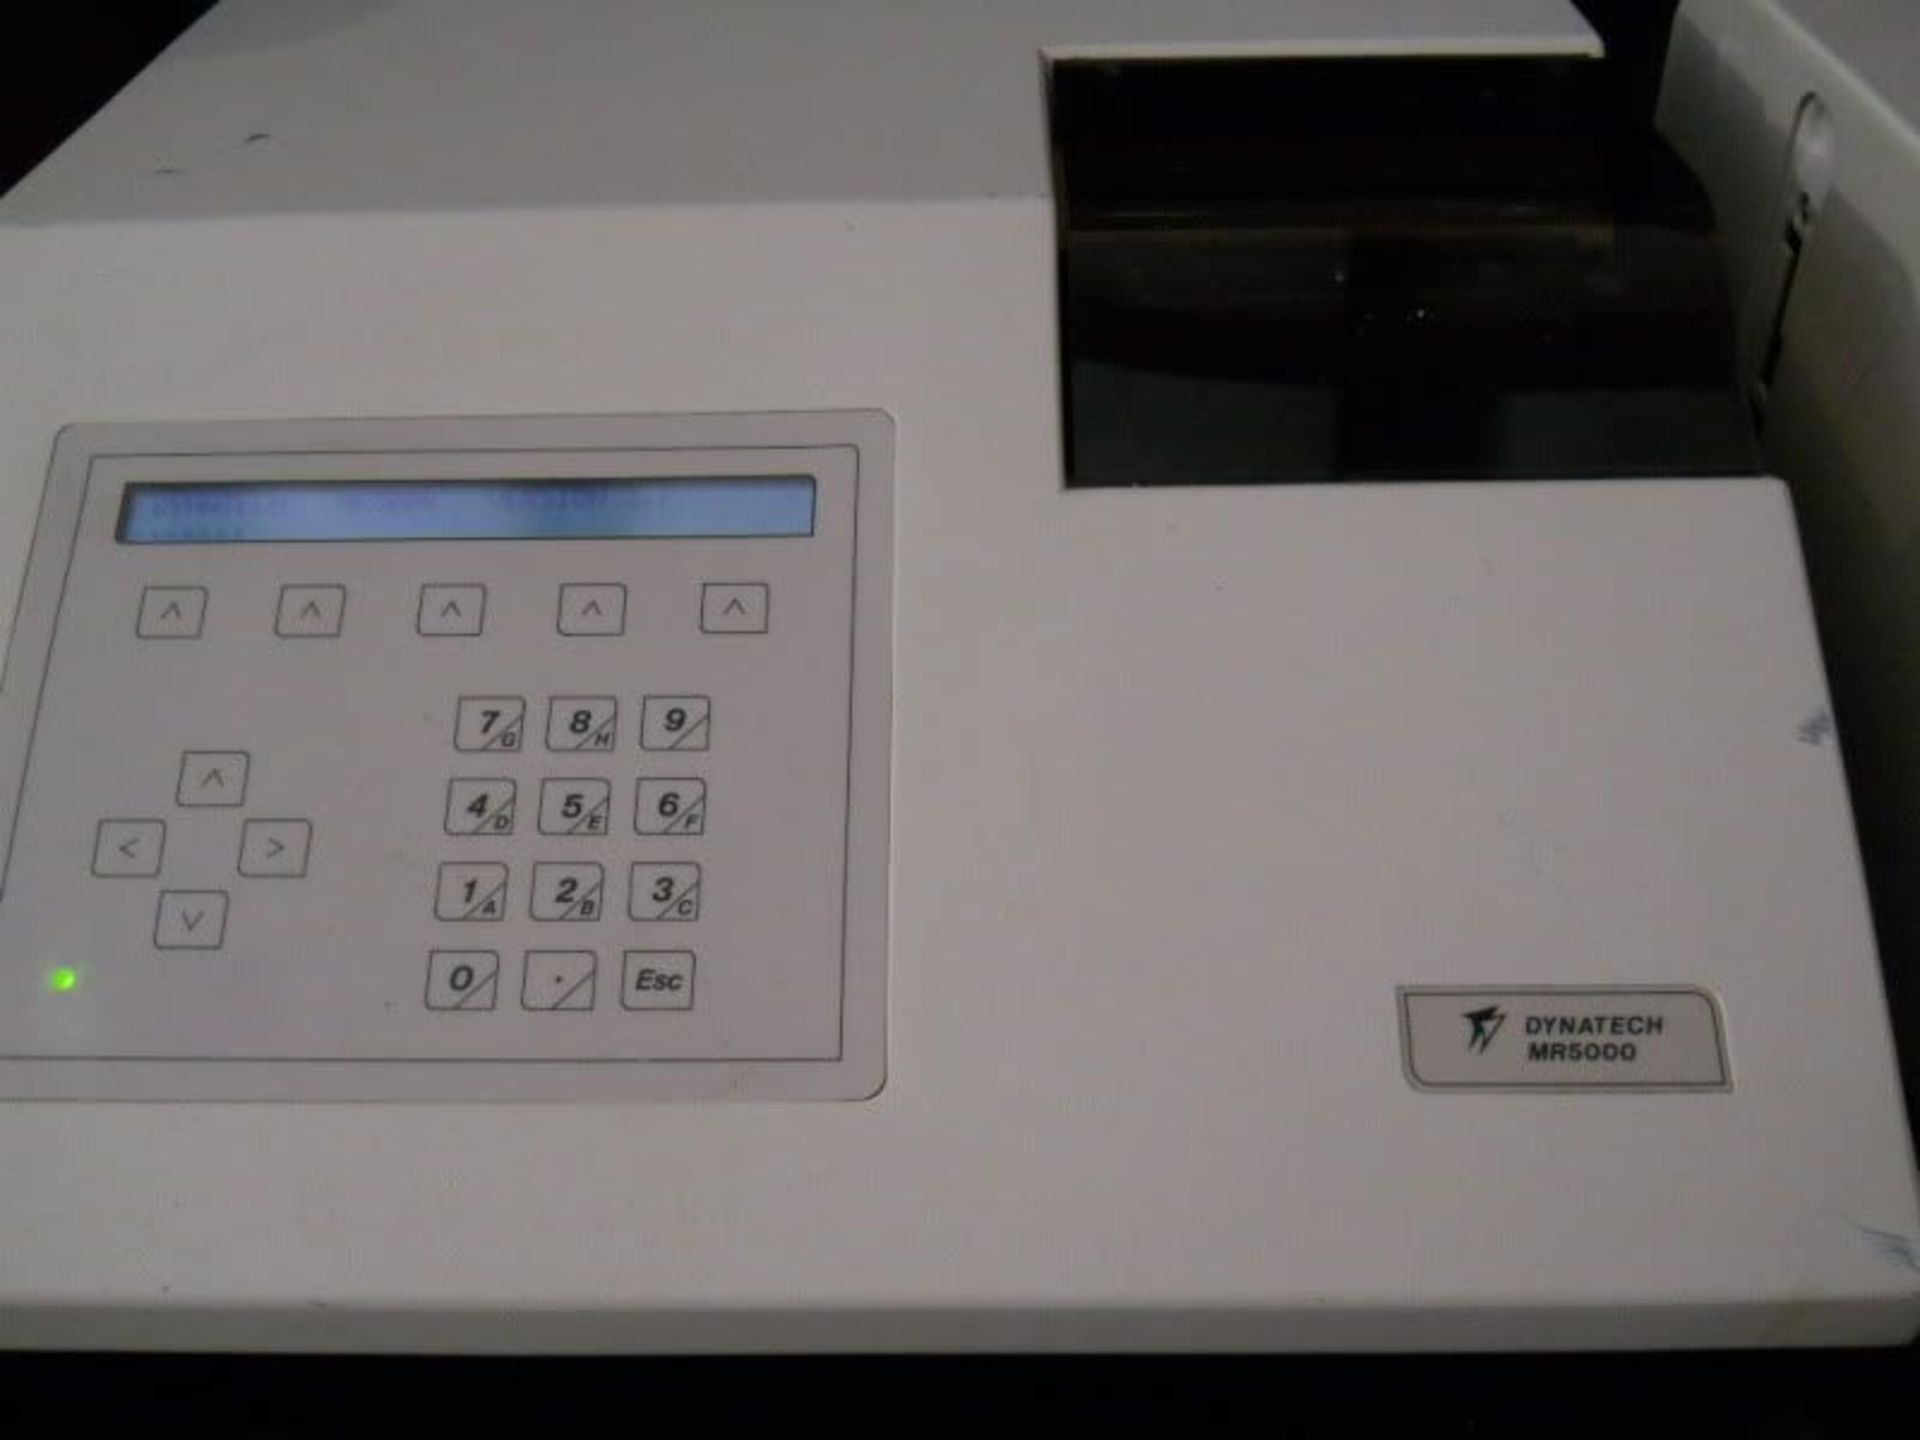 Lot of 2 Dynatech MR5000 Microplate Readers (Parts Not Working), Qty 1, 221094217837 - Image 2 of 12